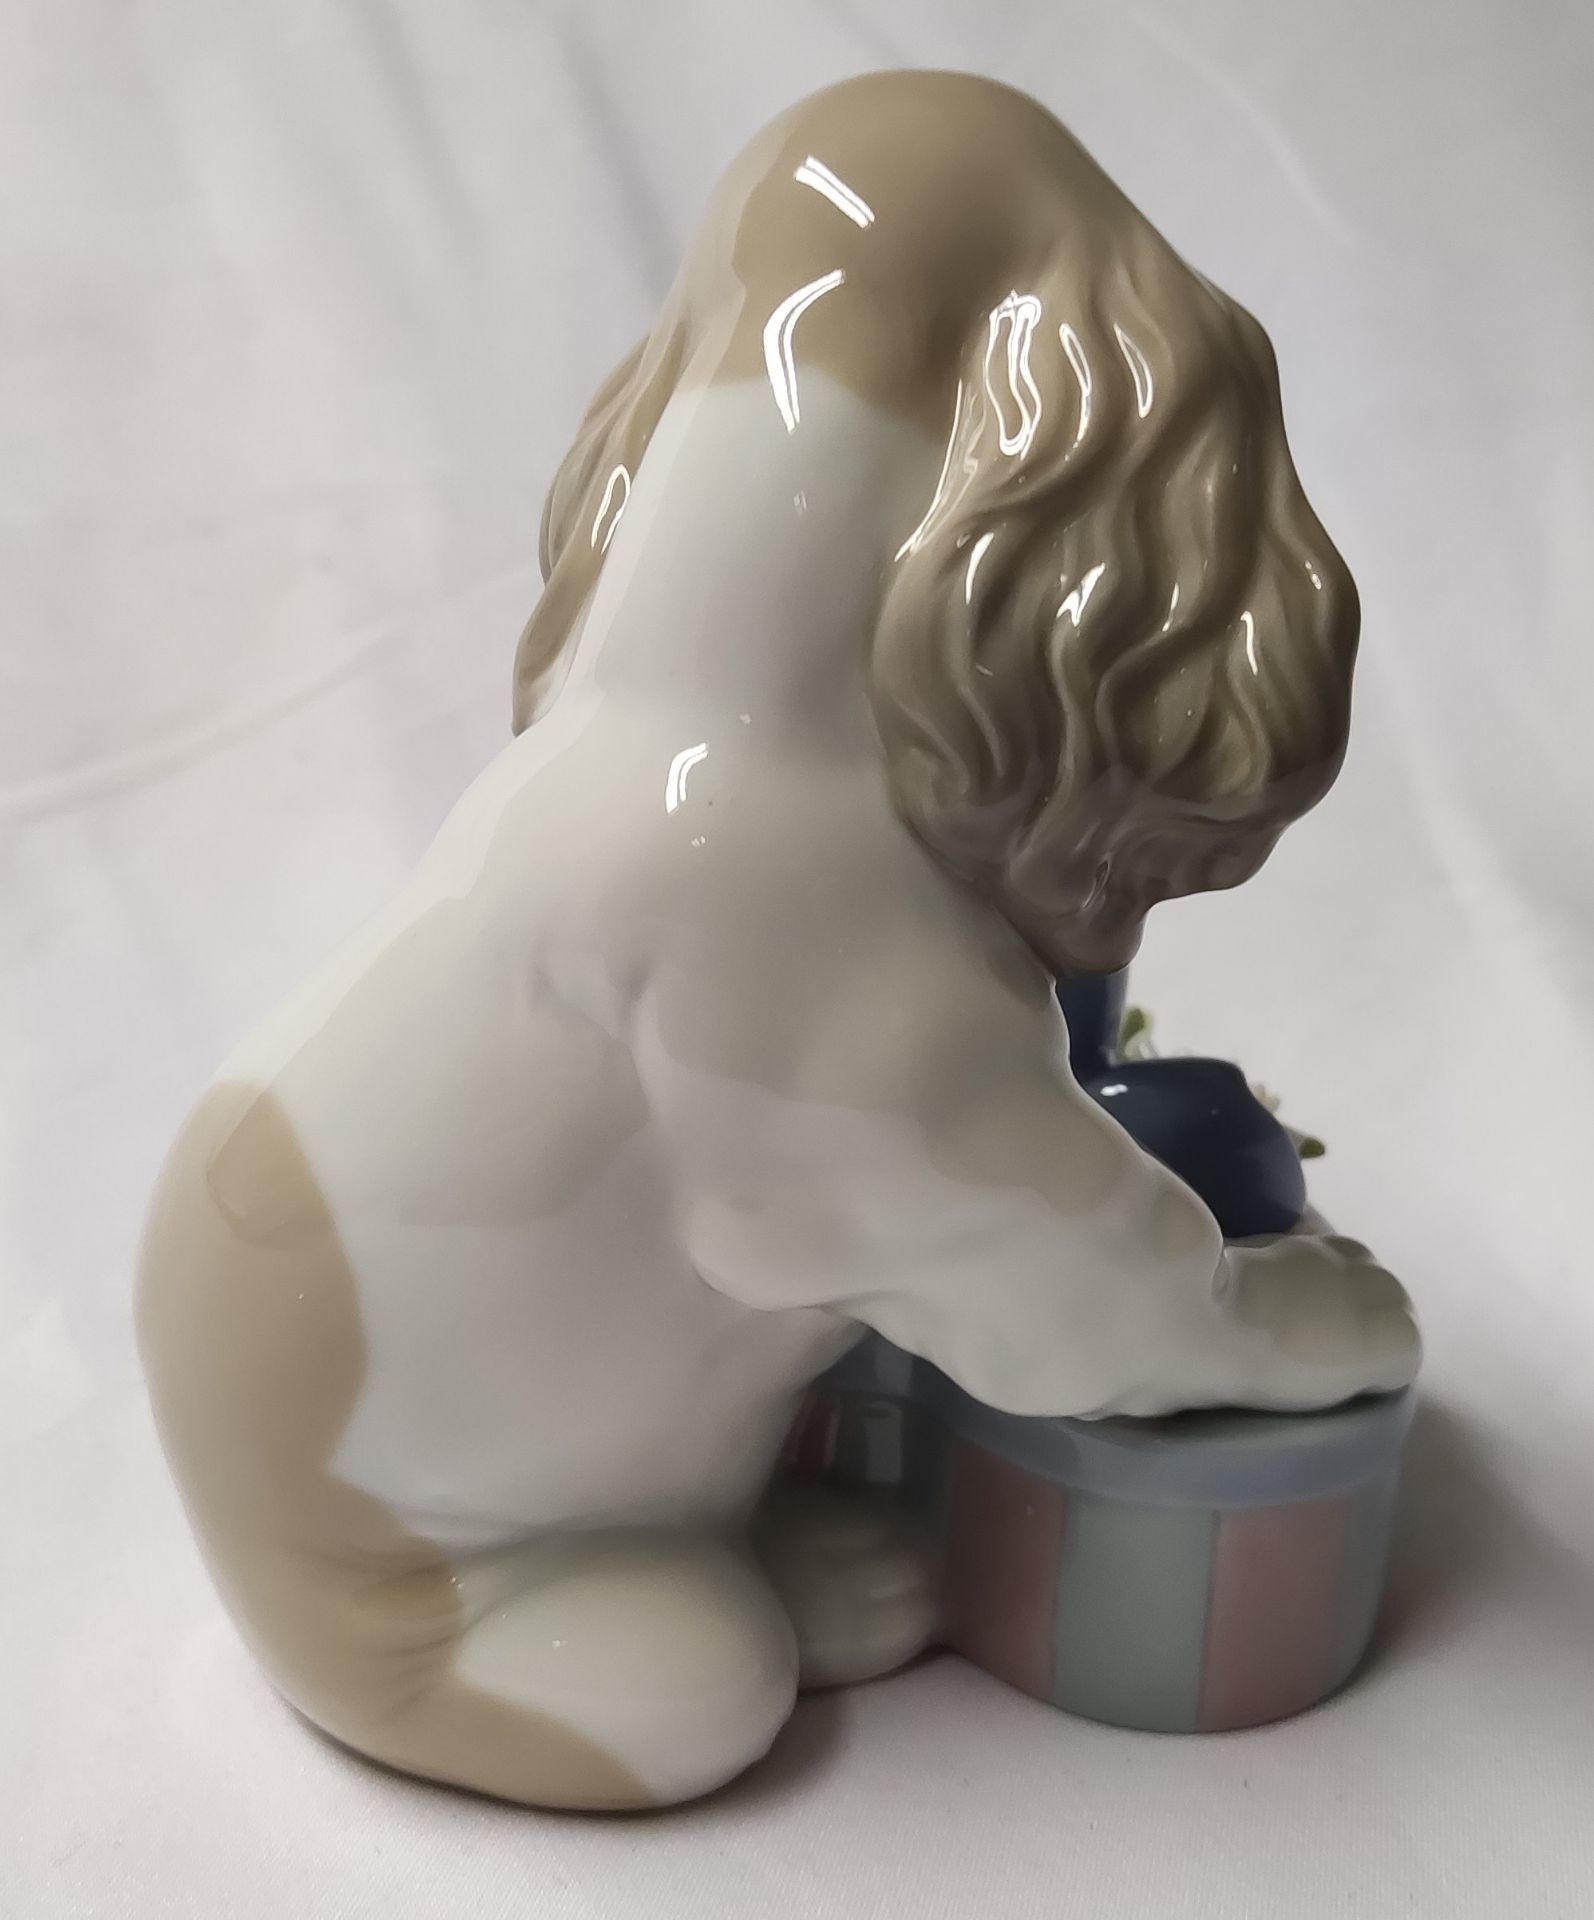 1 x LLADRO Can't Wait Puppy Dog Porcelain Figurine - New/Boxed - RRP £330 - Ref: /HOC244/HC5 - CL987 - Image 10 of 22